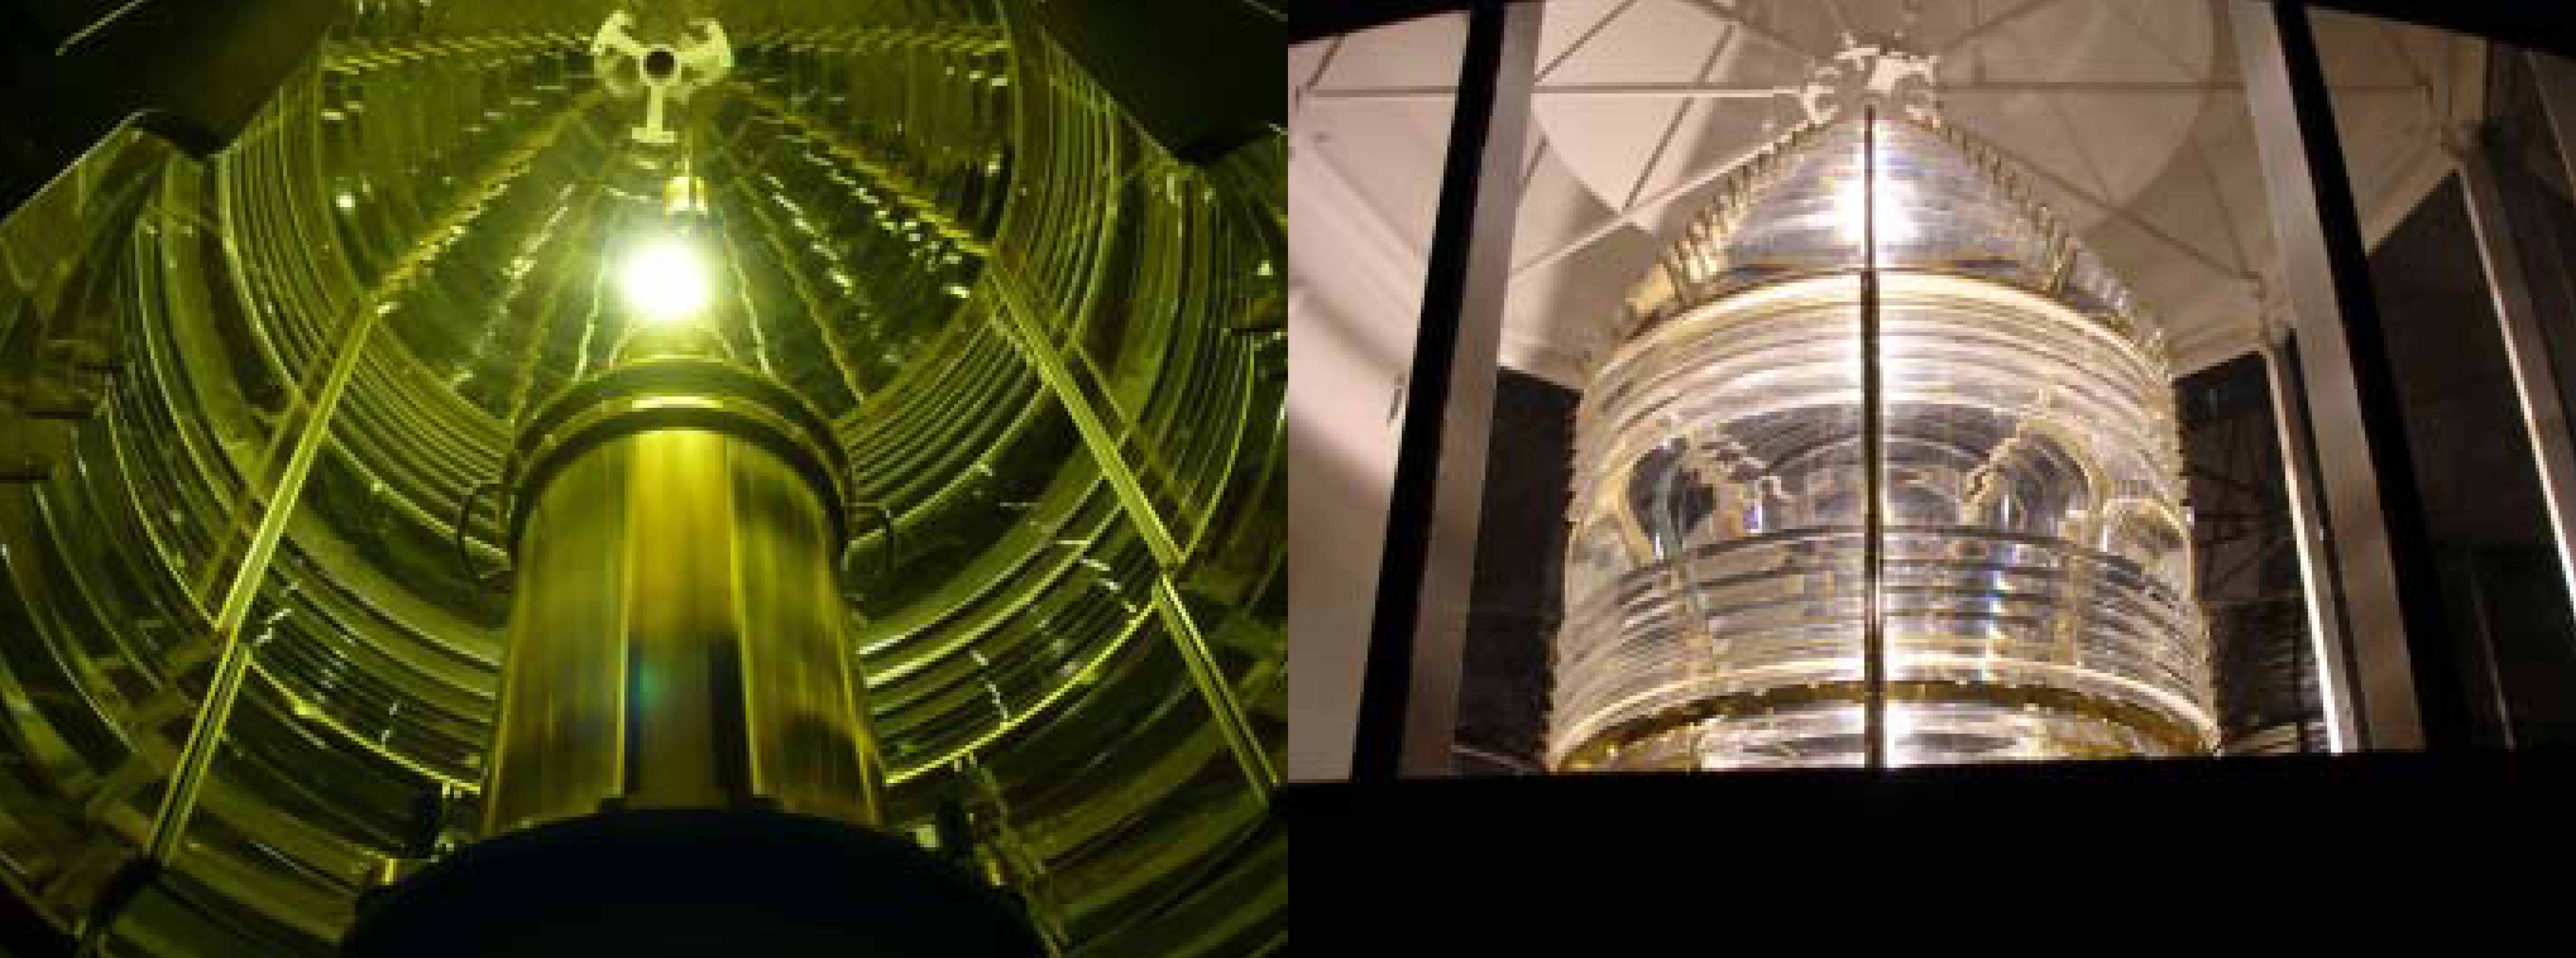 The light shines from the replica fresnel lens.